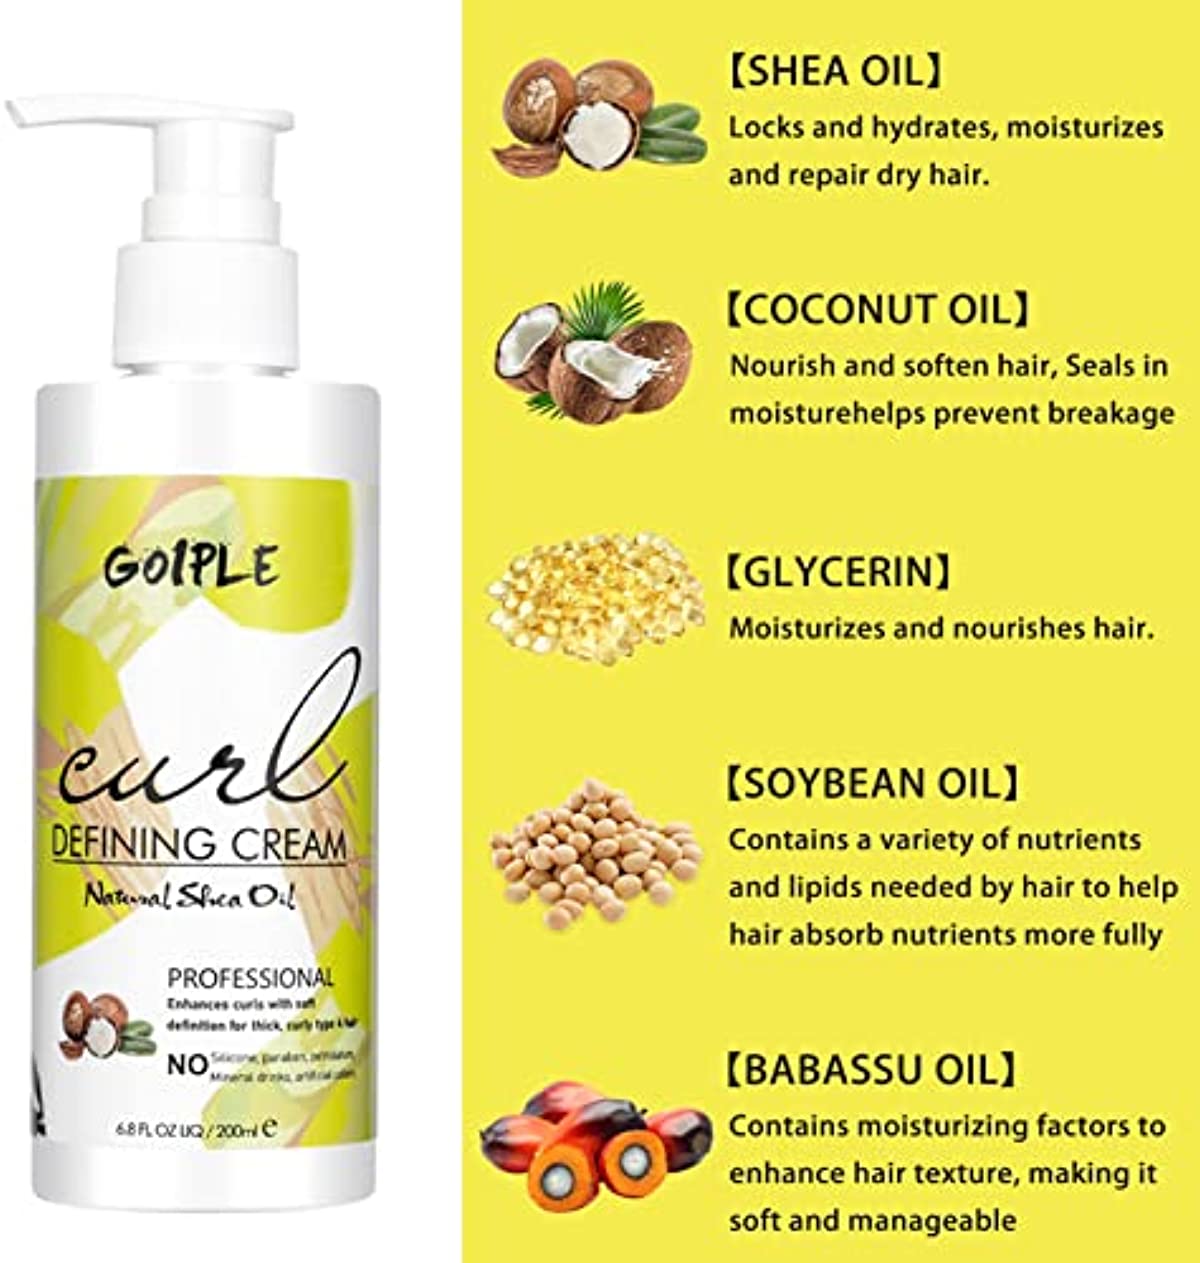 Curl Defining Cream for Curly Hair - Curling Perfection Wavy Hair Products Curl Cream, Hair-Smoothing Anti-Frizz Cream to Define All Natural Curl Types & Hair Textures with 9 Row Brush